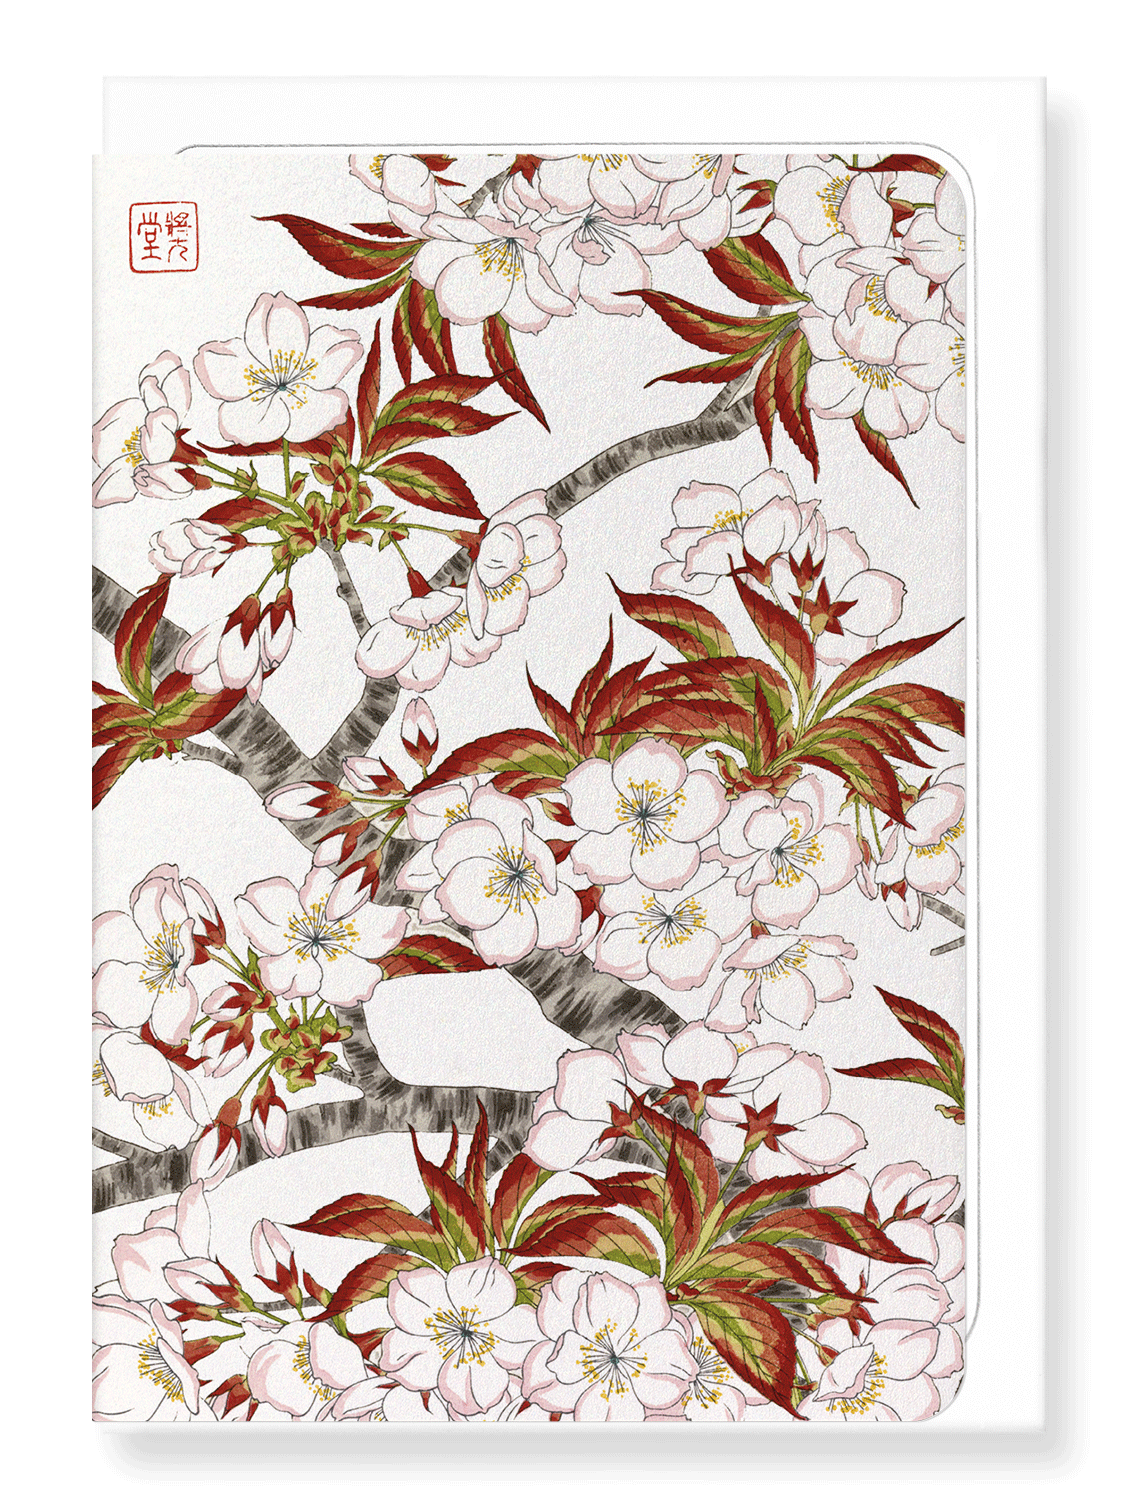 Ezen Designs - Cherry blossom flowers - Greeting Card - Front